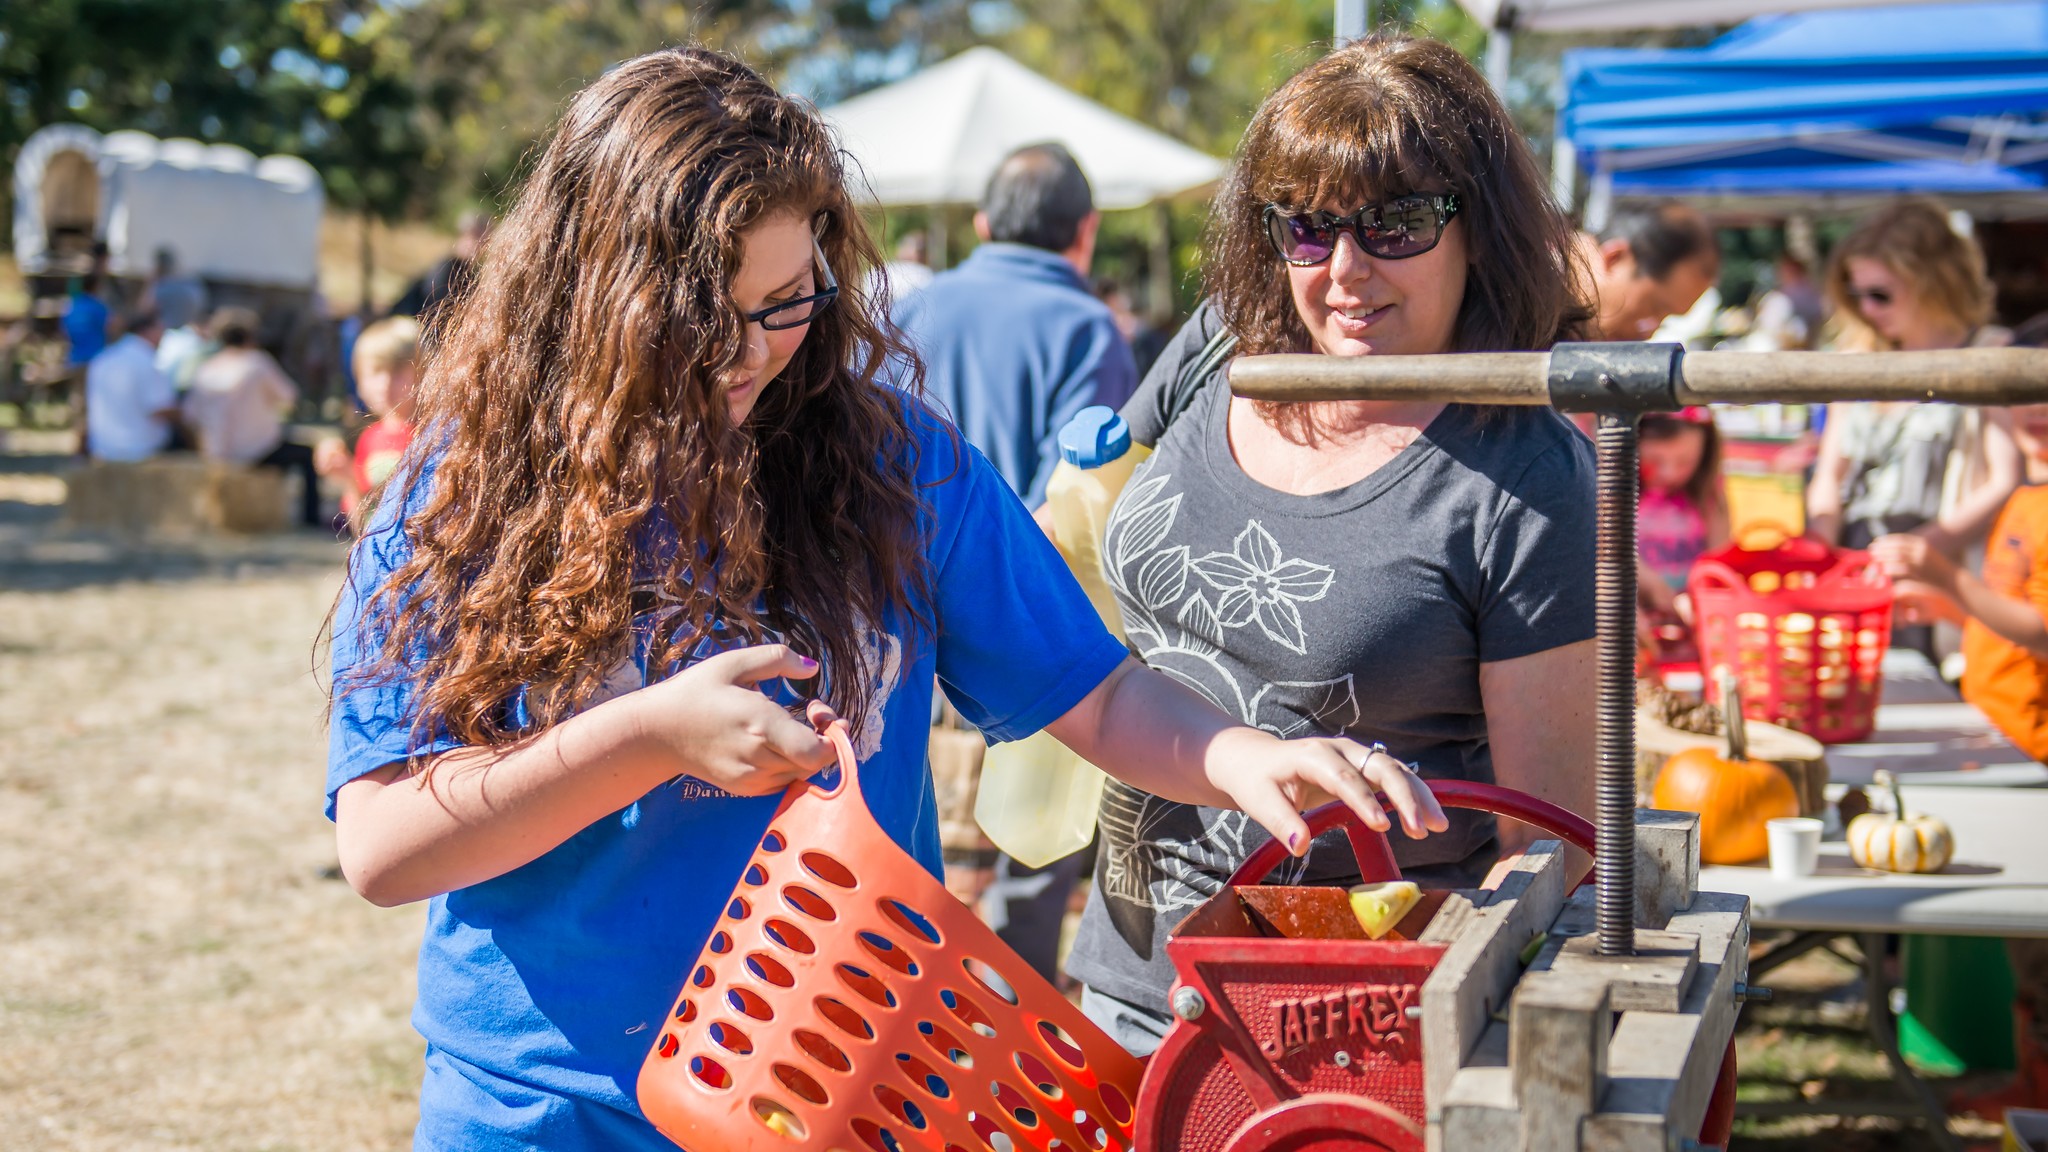 Trees, apples and cider! Vancouver celebrates the Old Apple Tree on Saturday, Oct. 7